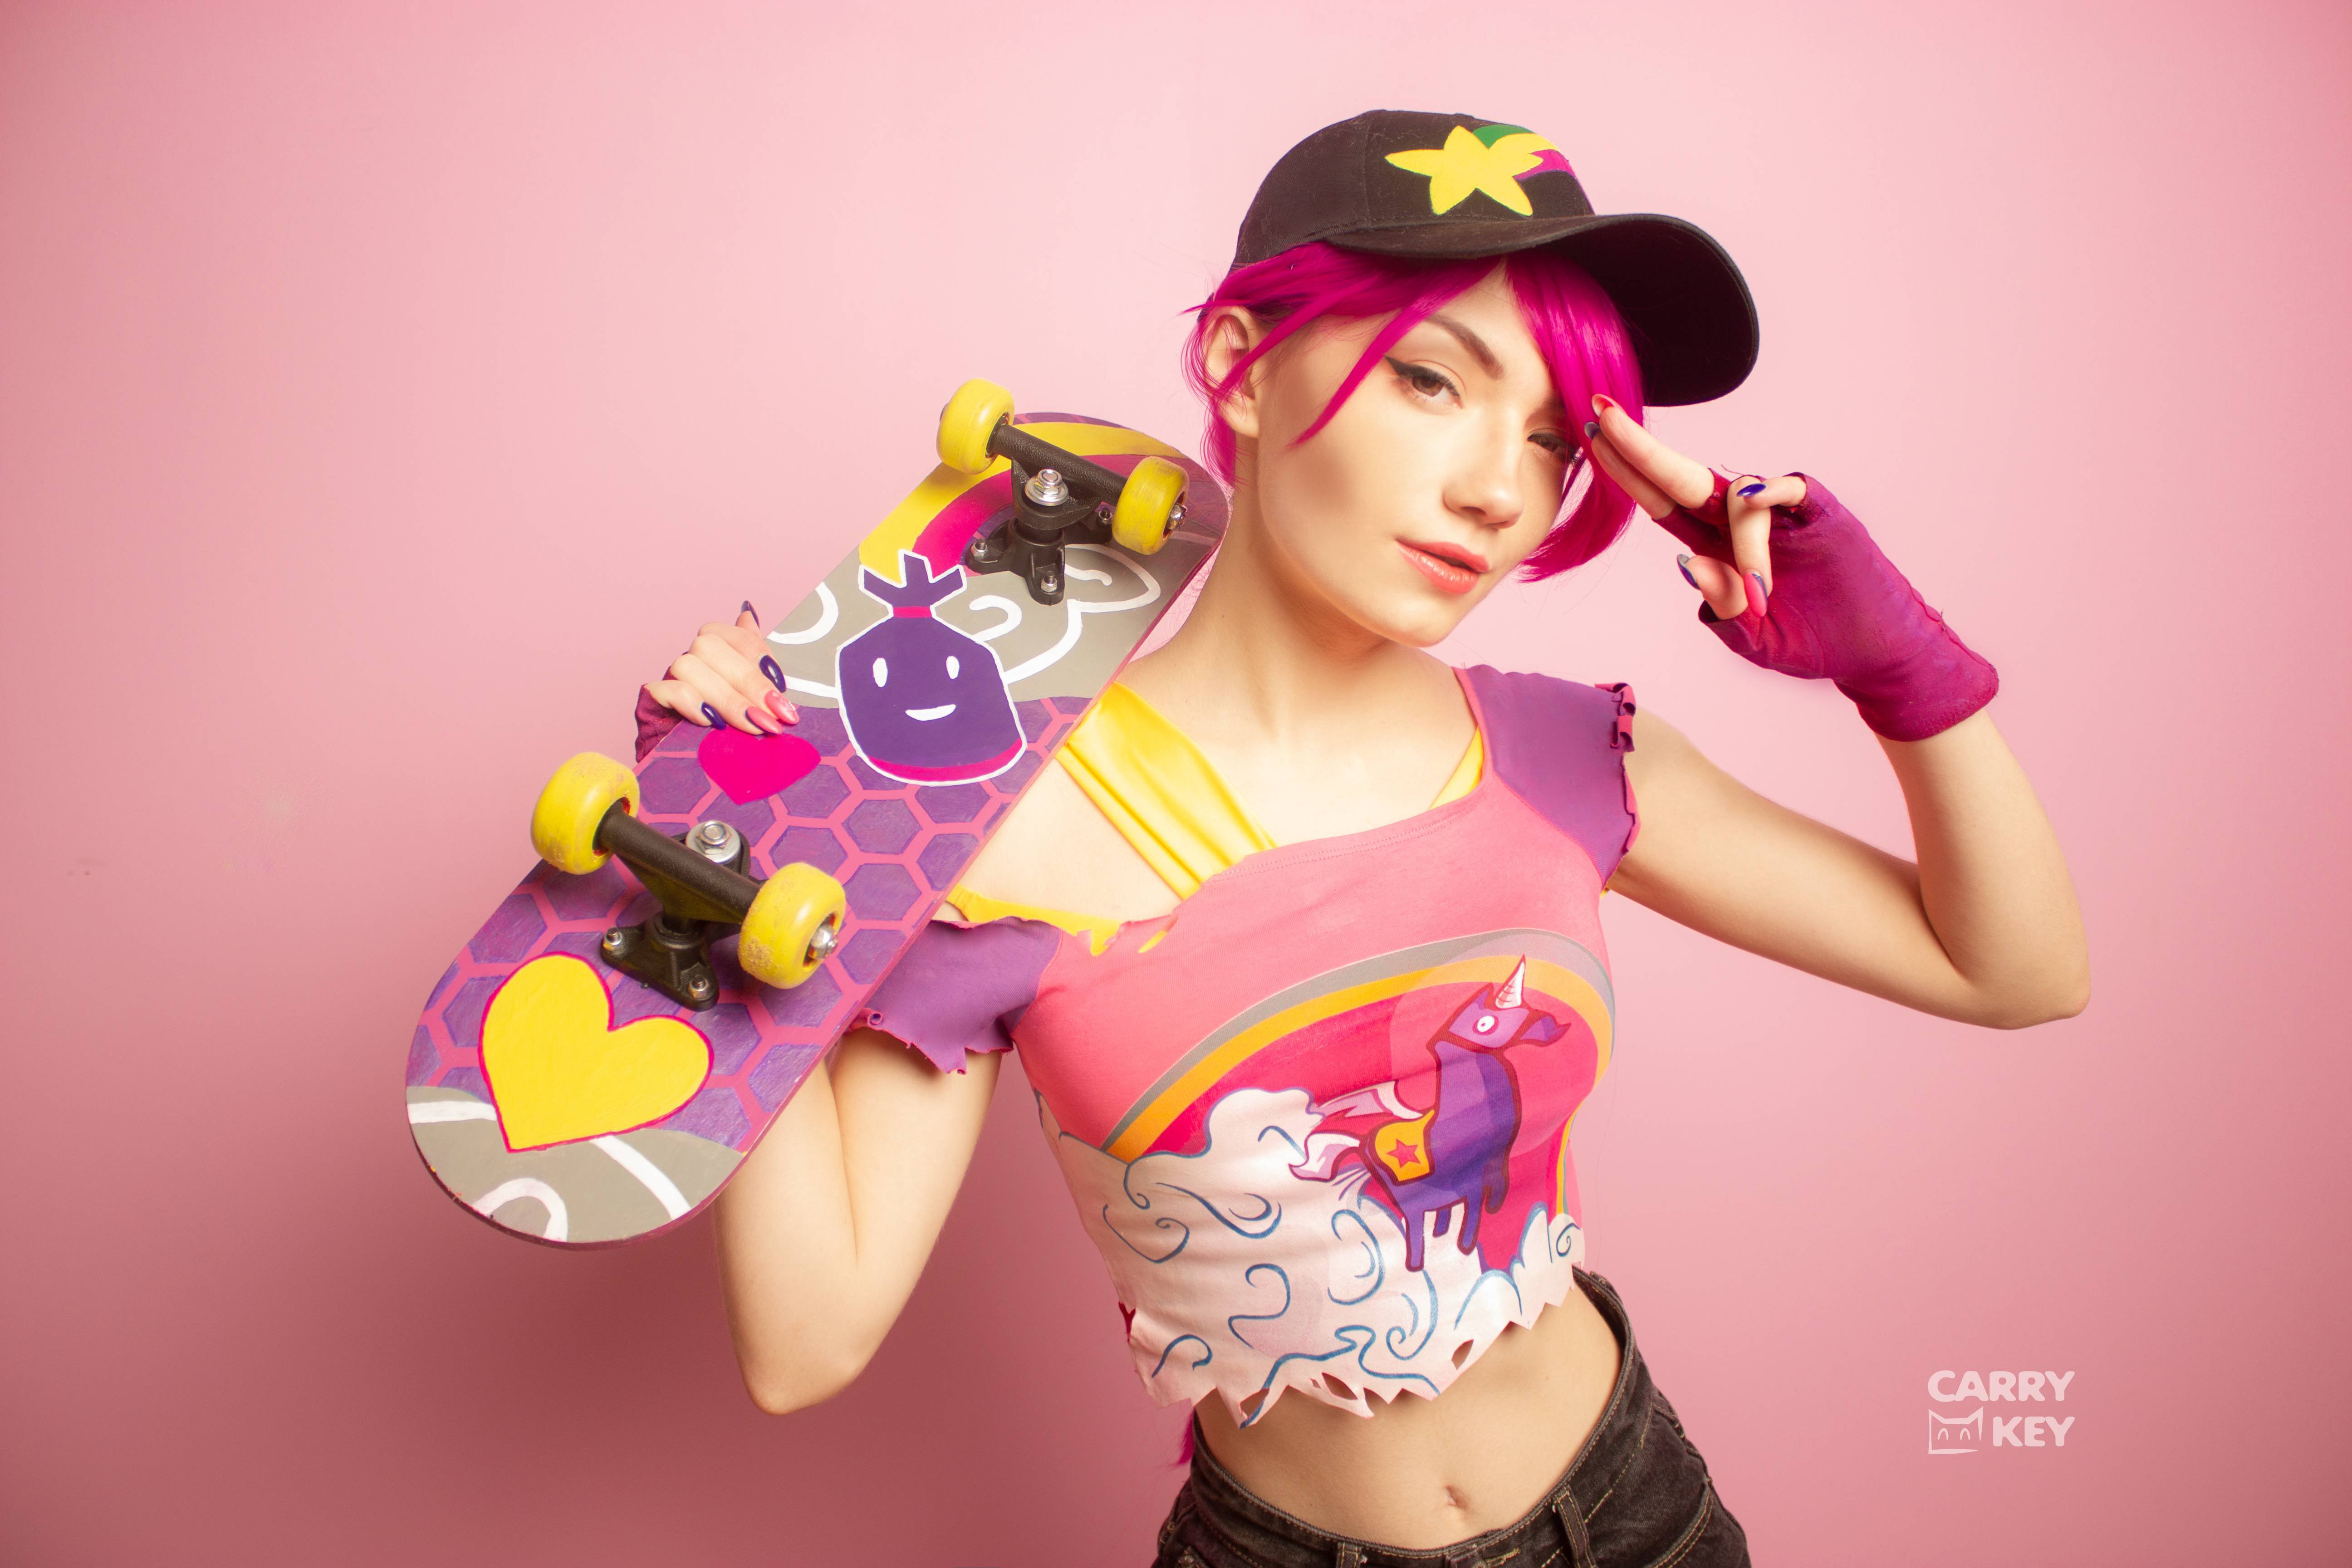 Photo Carry Key cosplay pink hair - free pictures on Fonwall.